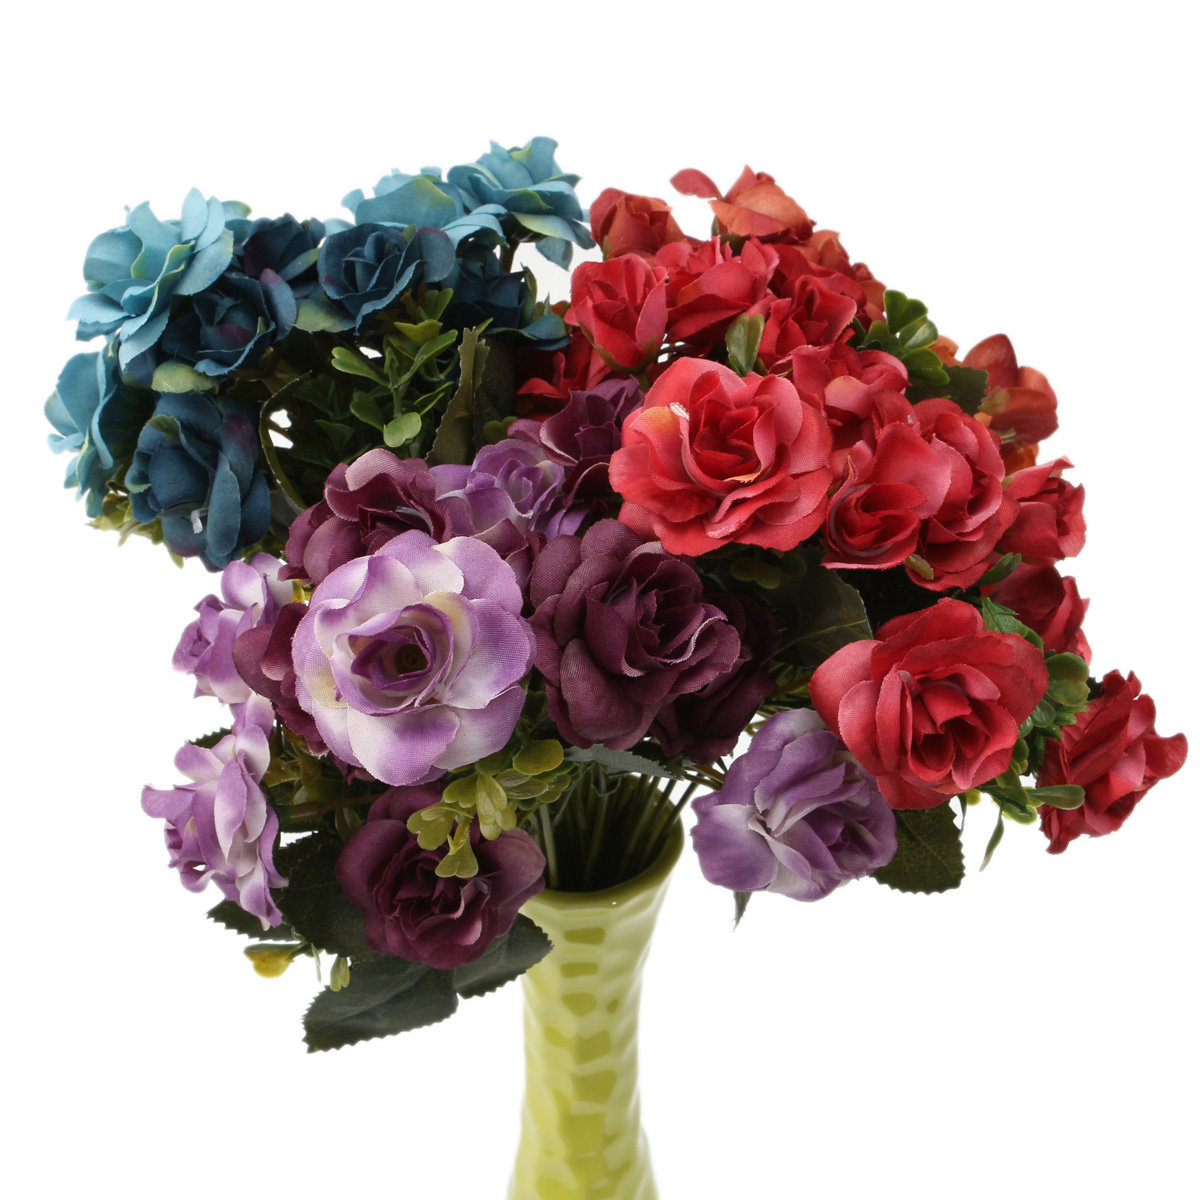 

4 Colors Artificial Rose Bouquet Simulated Flowers Leaf Home Wedding Garden Decor, Red blue coffee purple